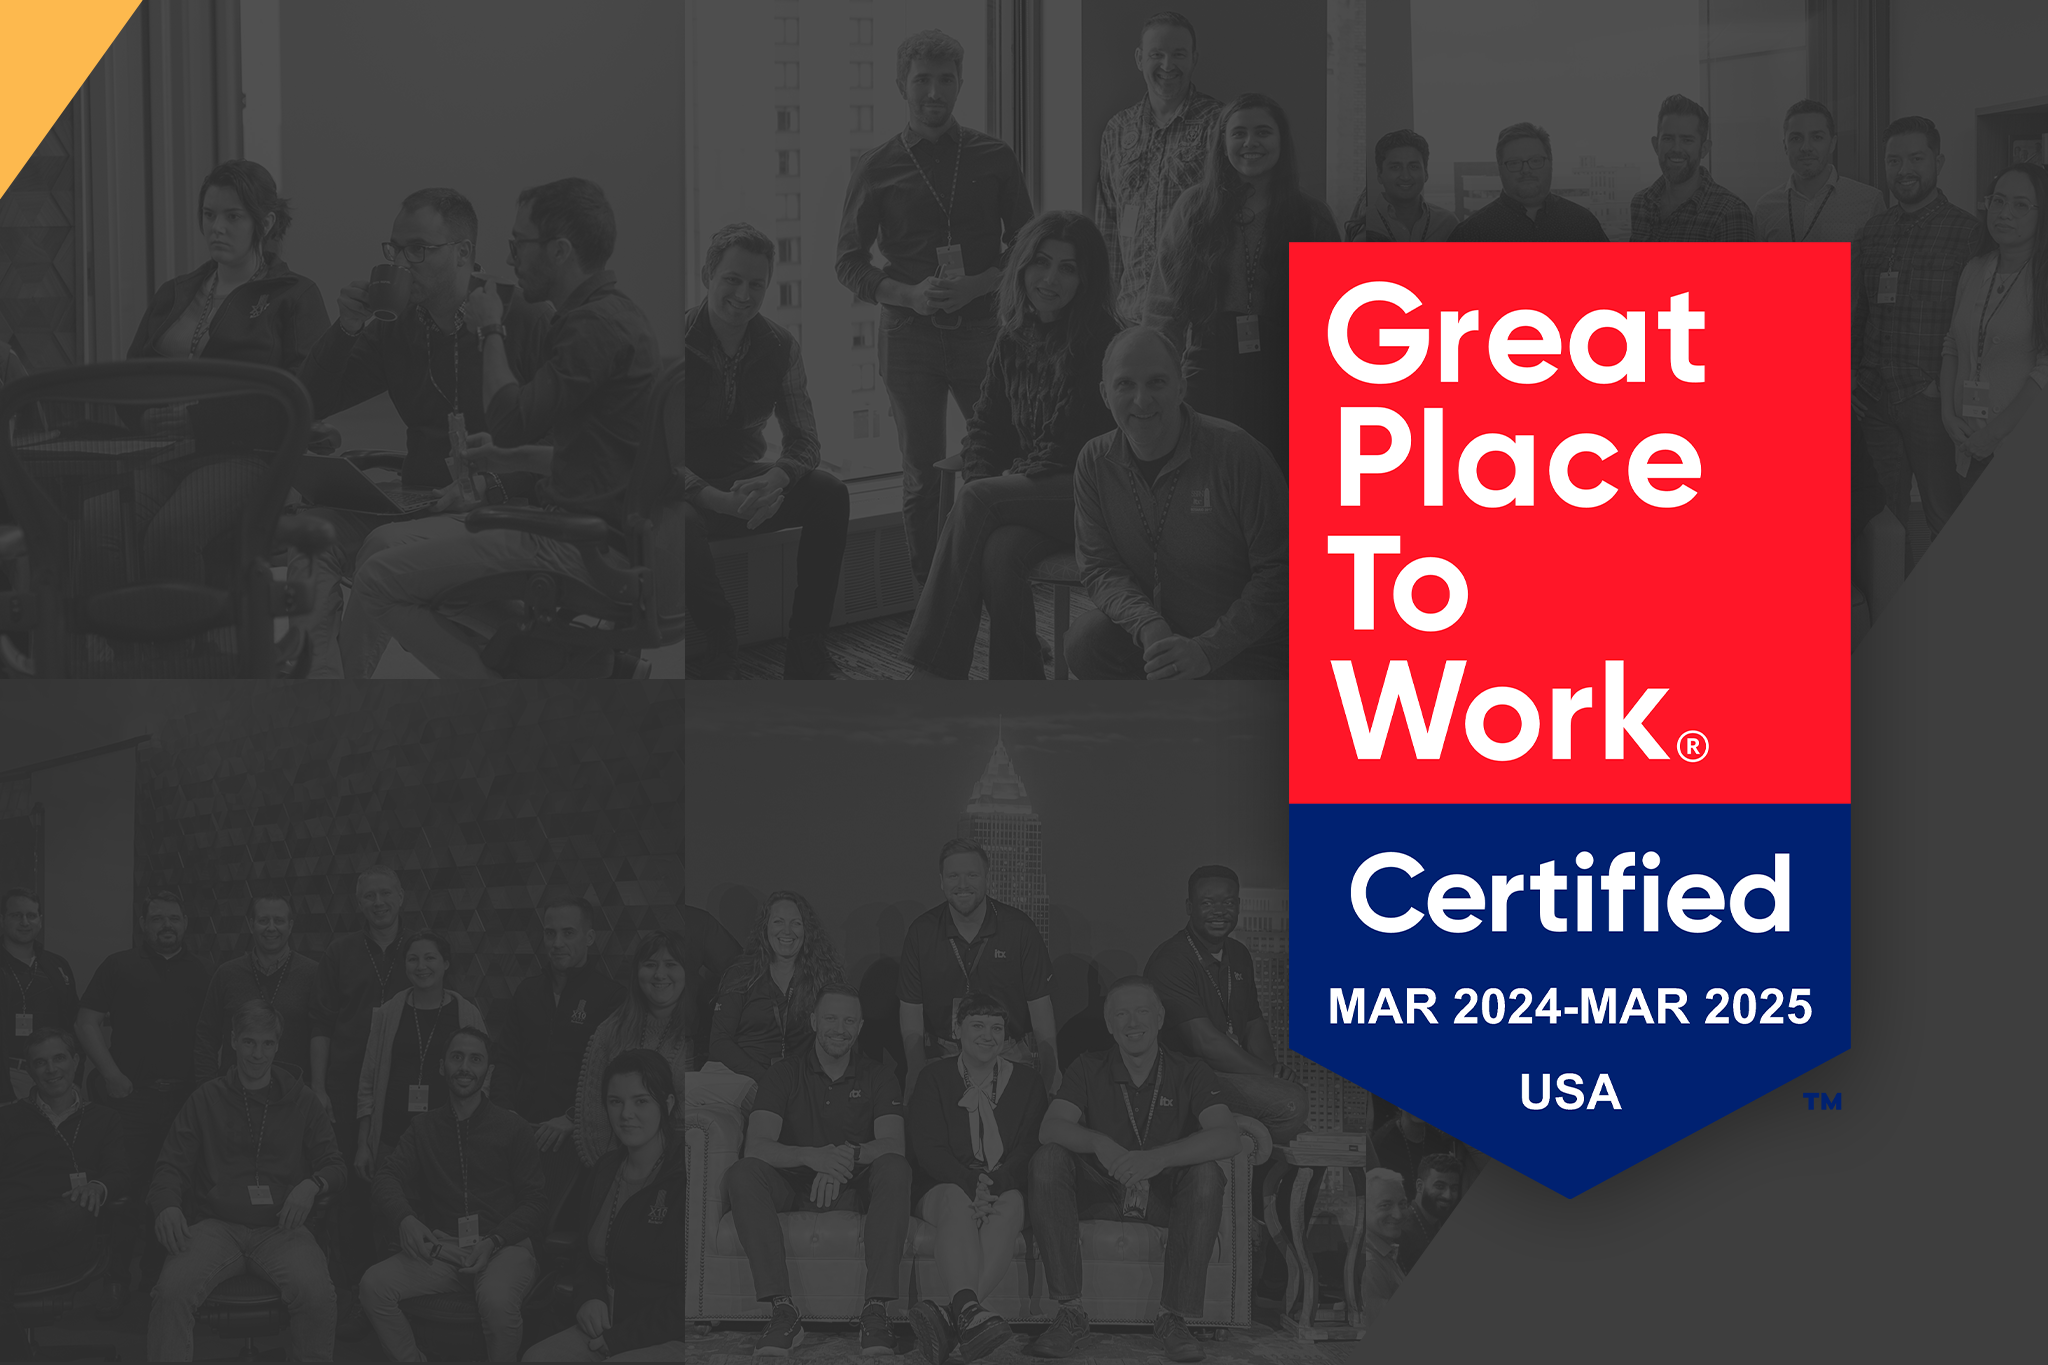 Great Place to Work Badge along with some ITX Team members in the background.